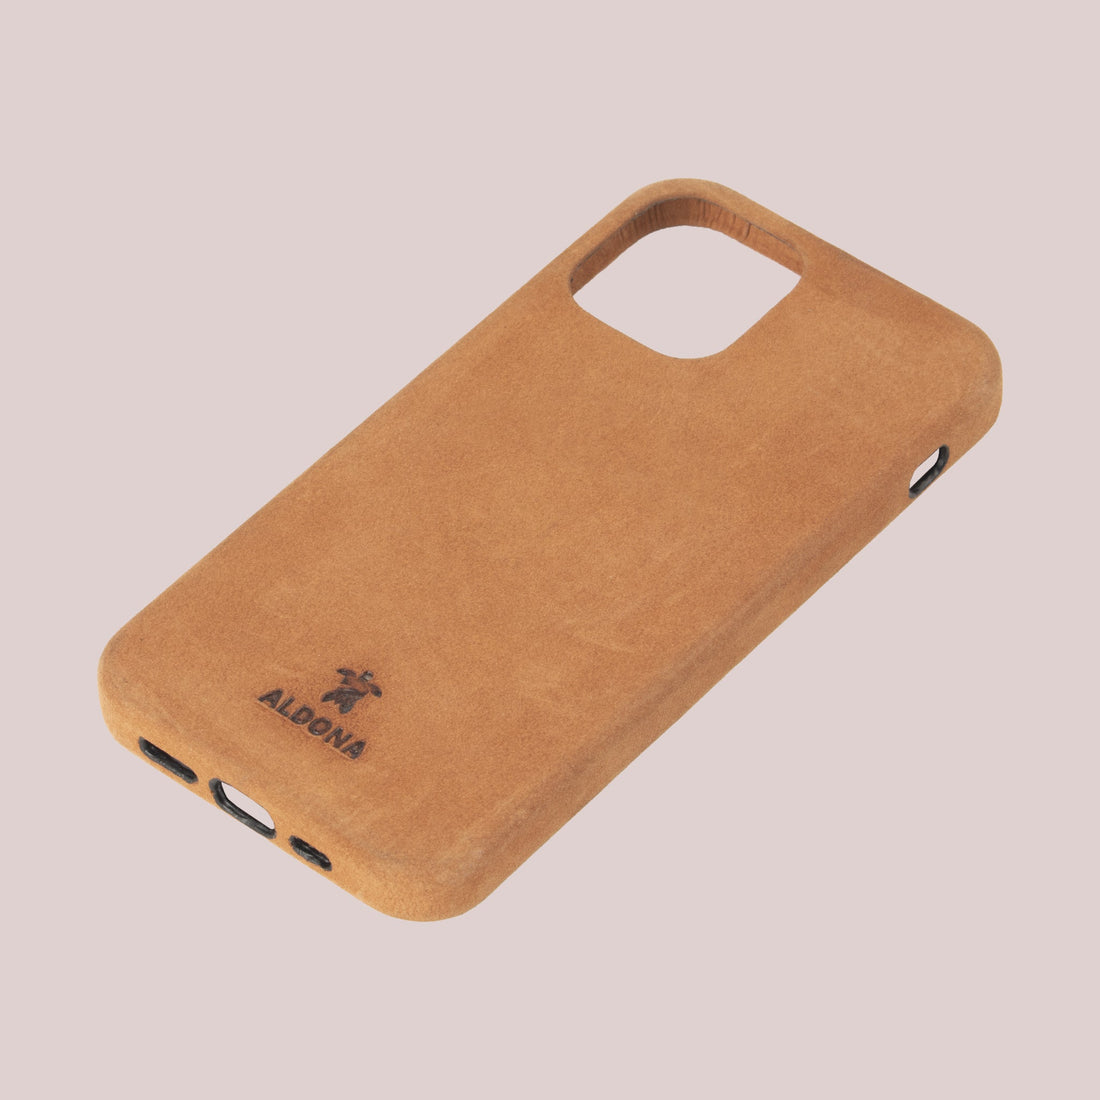 Kalon Case for iPhone 12 Mini series with MagSafe Compatibility - Cognac